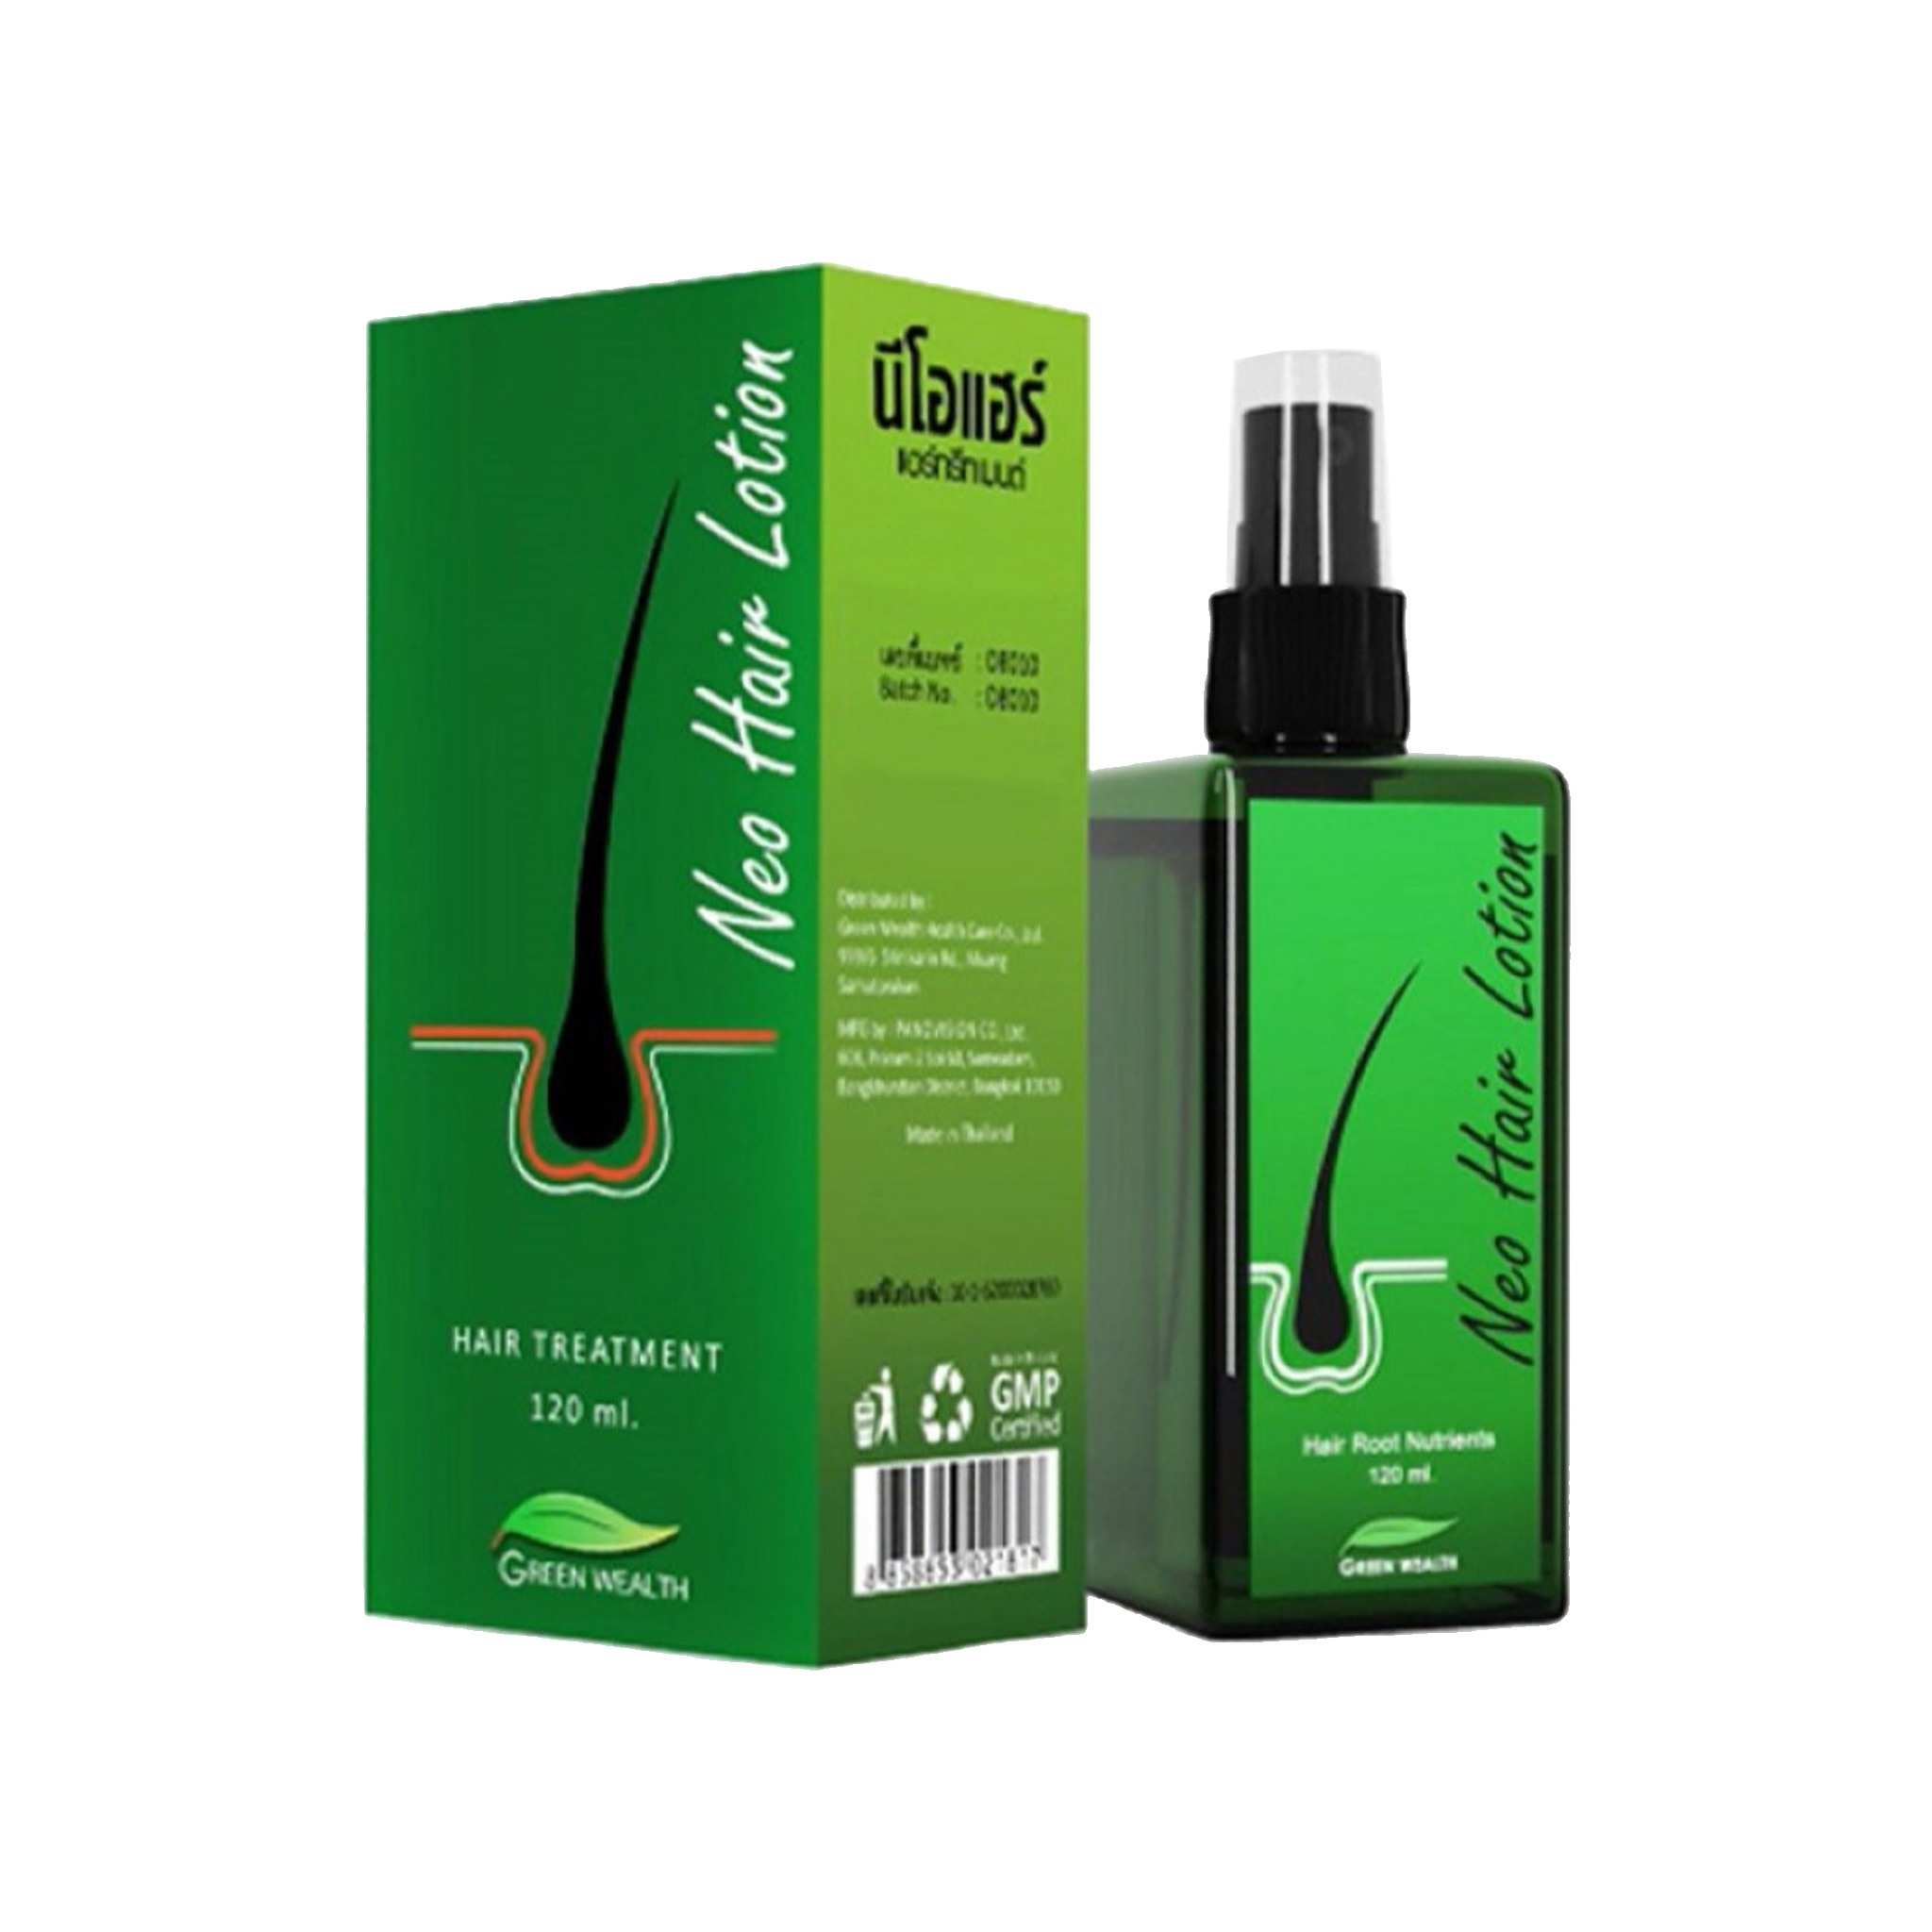 Green wealth Neo Hair Growth Lotion-100% Natural Treatment price from  kilimall in Kenya - Yaoota!